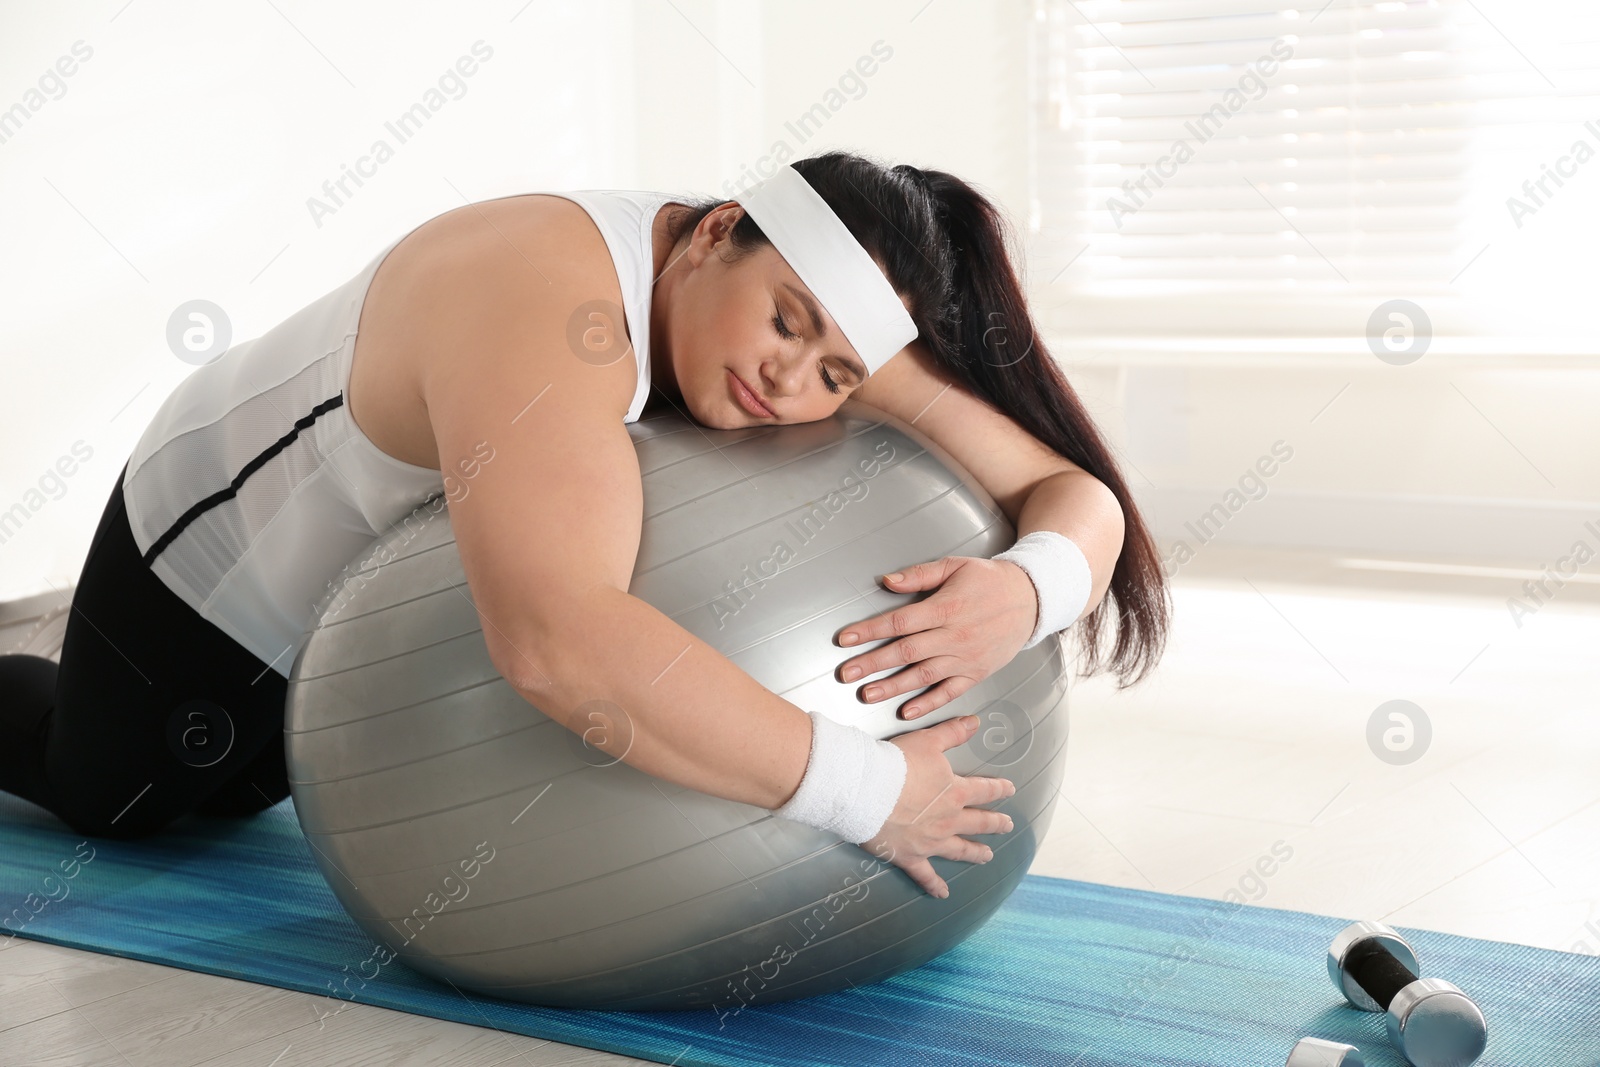 Photo of Lazy overweight woman leaning on fit ball instead of training at gym